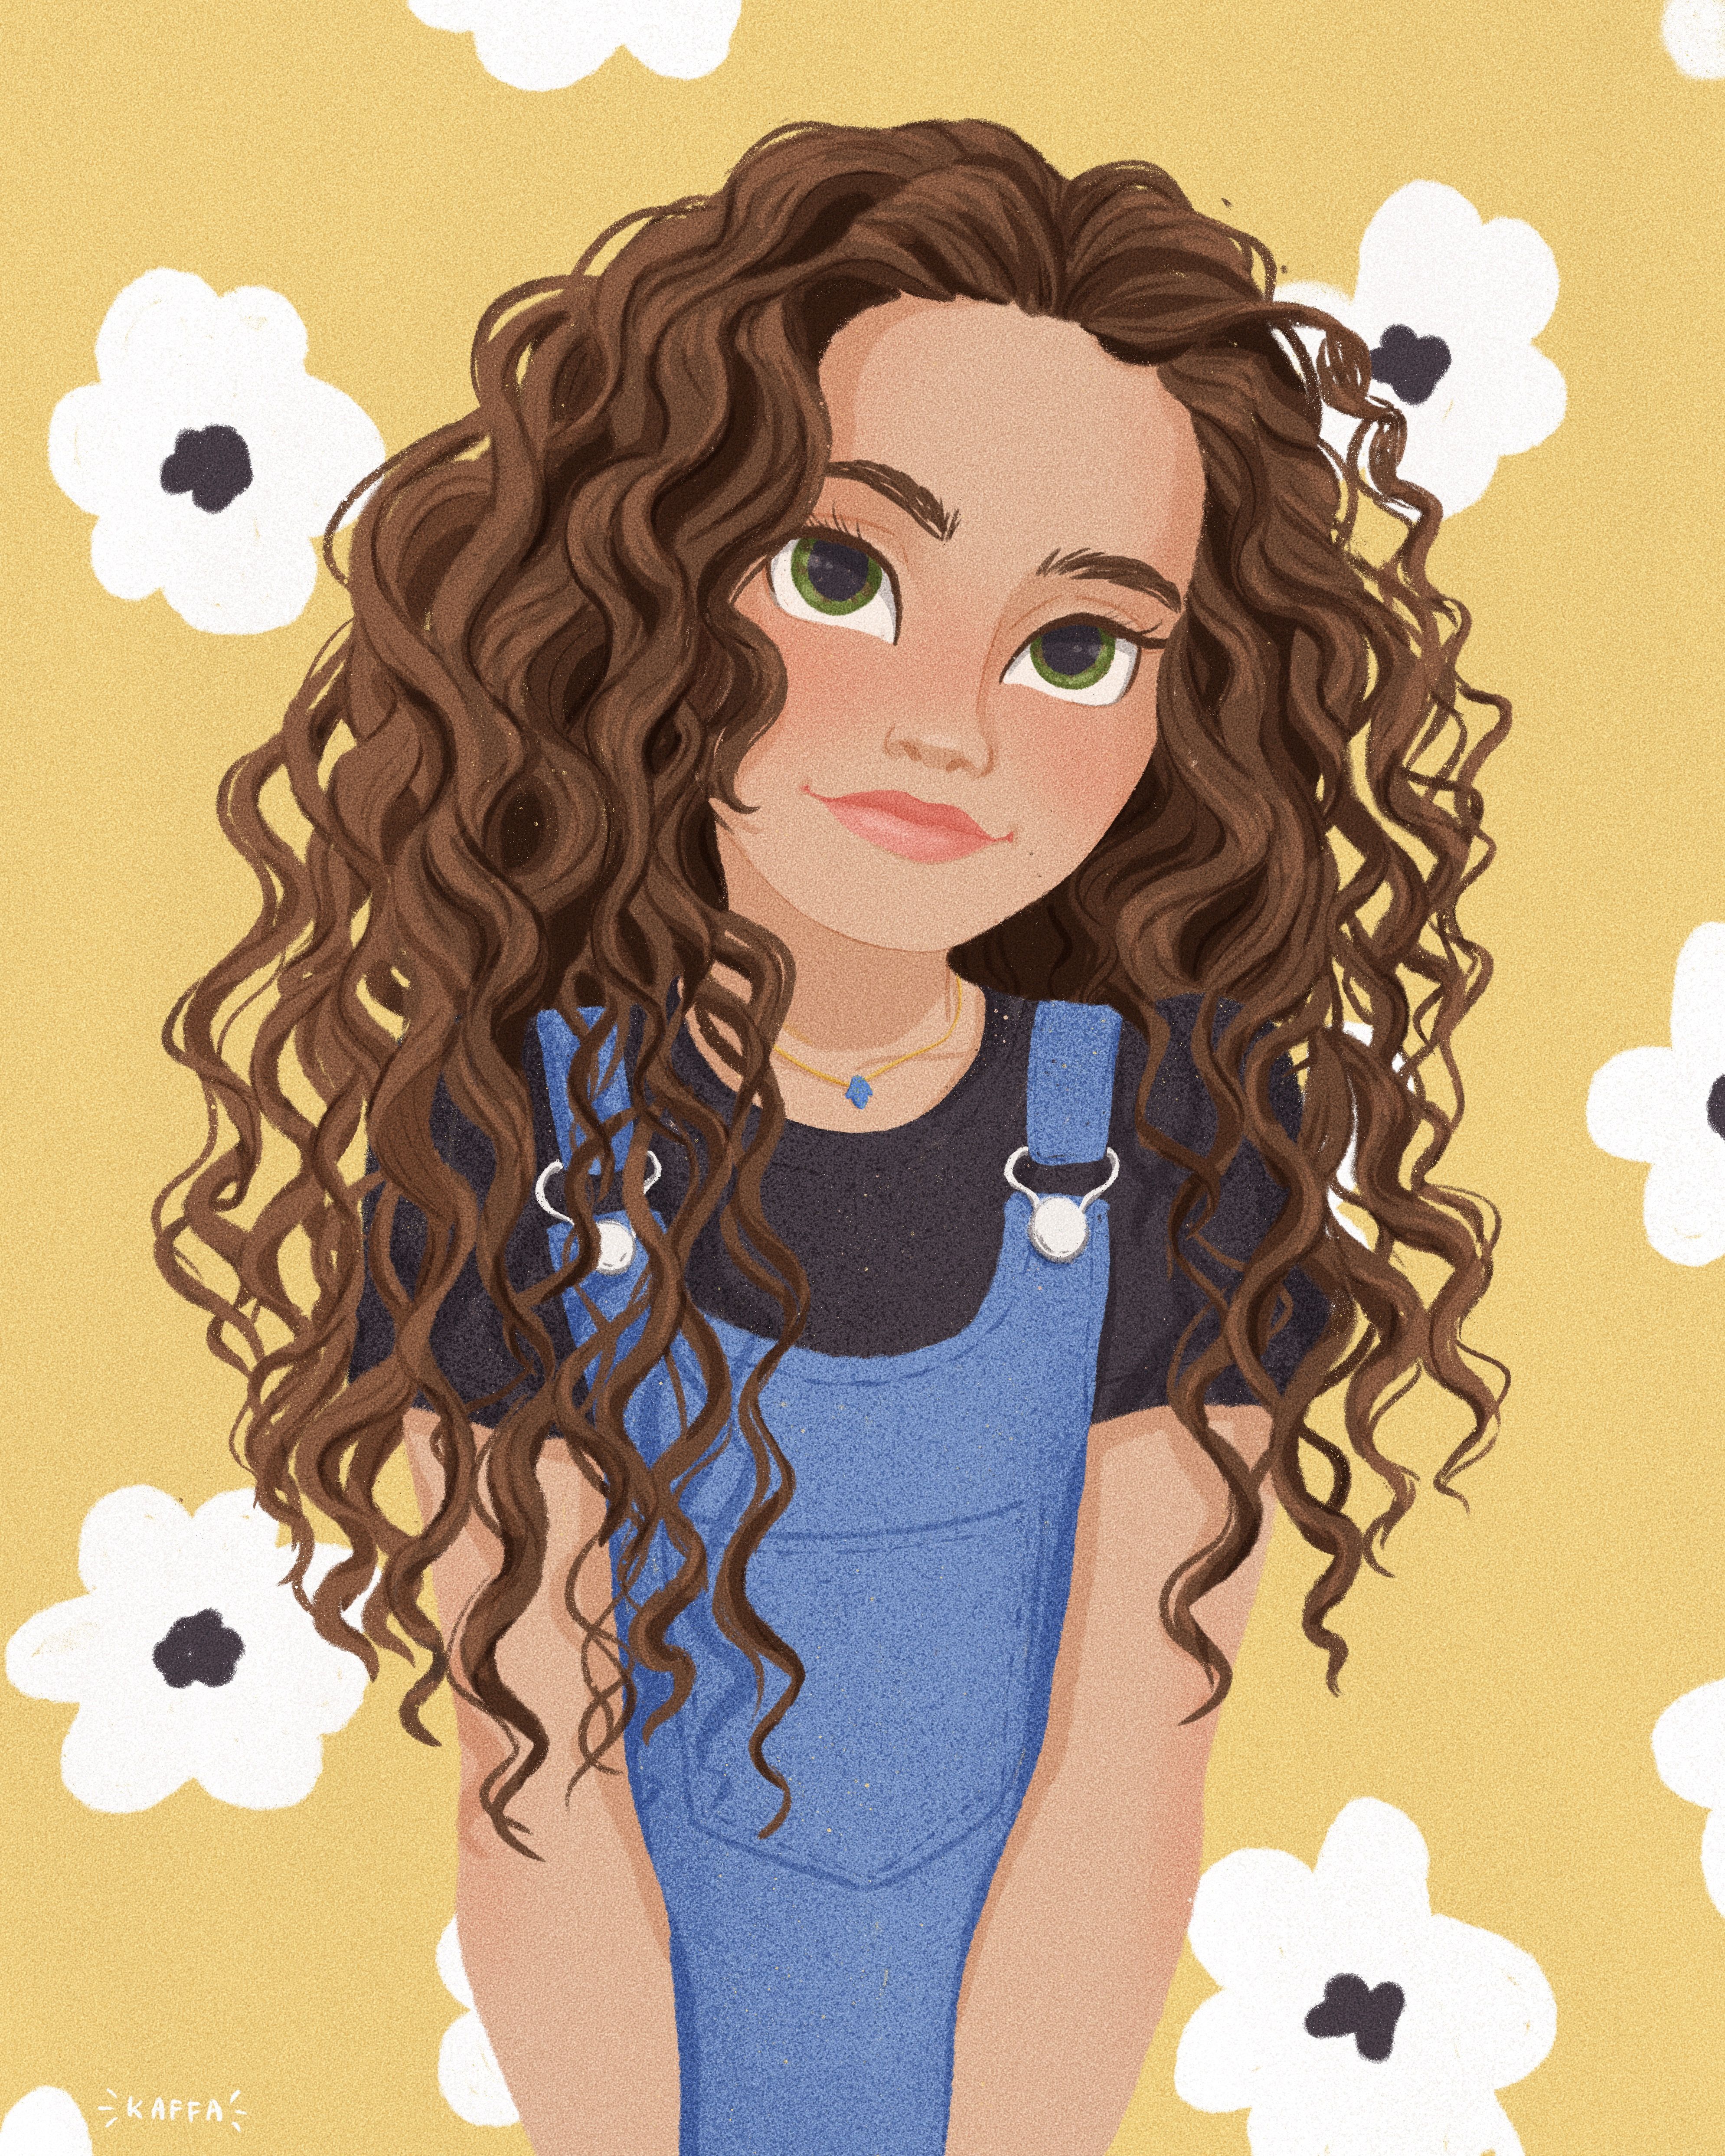 Anime girl, curly hair, blue themed clothes, cute, kawaii, clean lines in  drawing, brown eyes, hair anime girl drawing - thirstymag.com